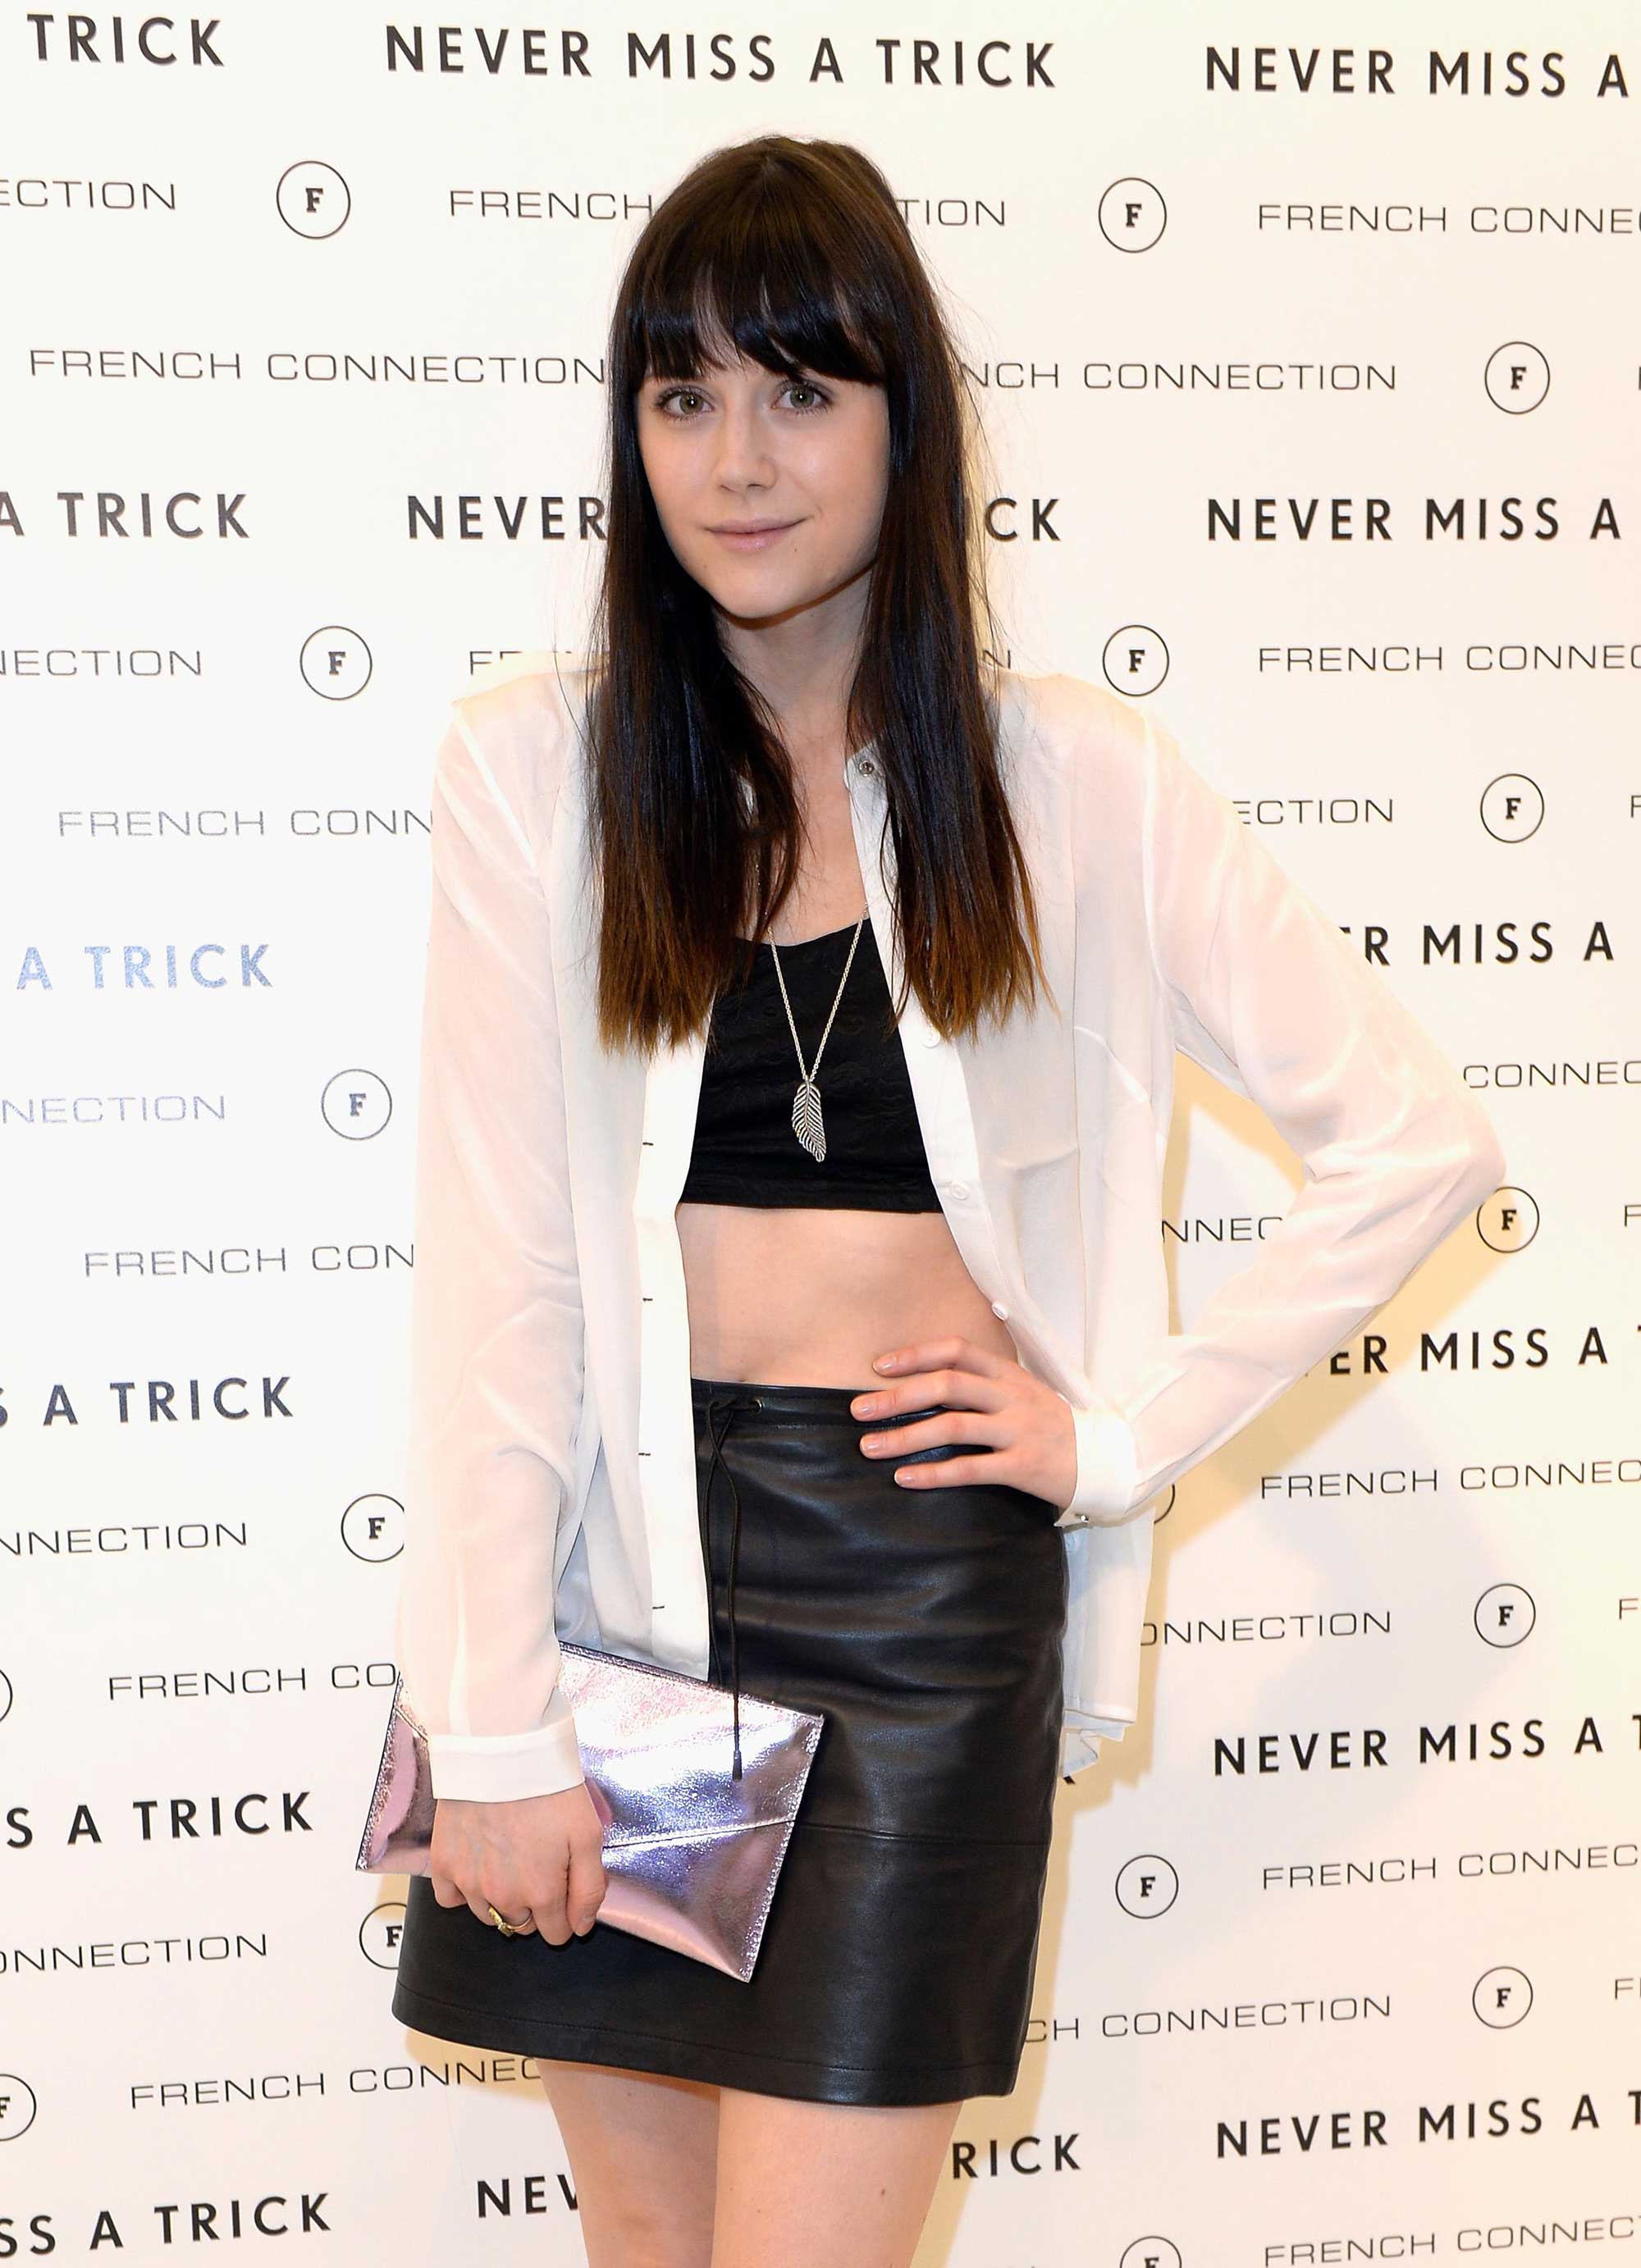 Lilah Parsons attends French Connection NeverMissATrick launch party